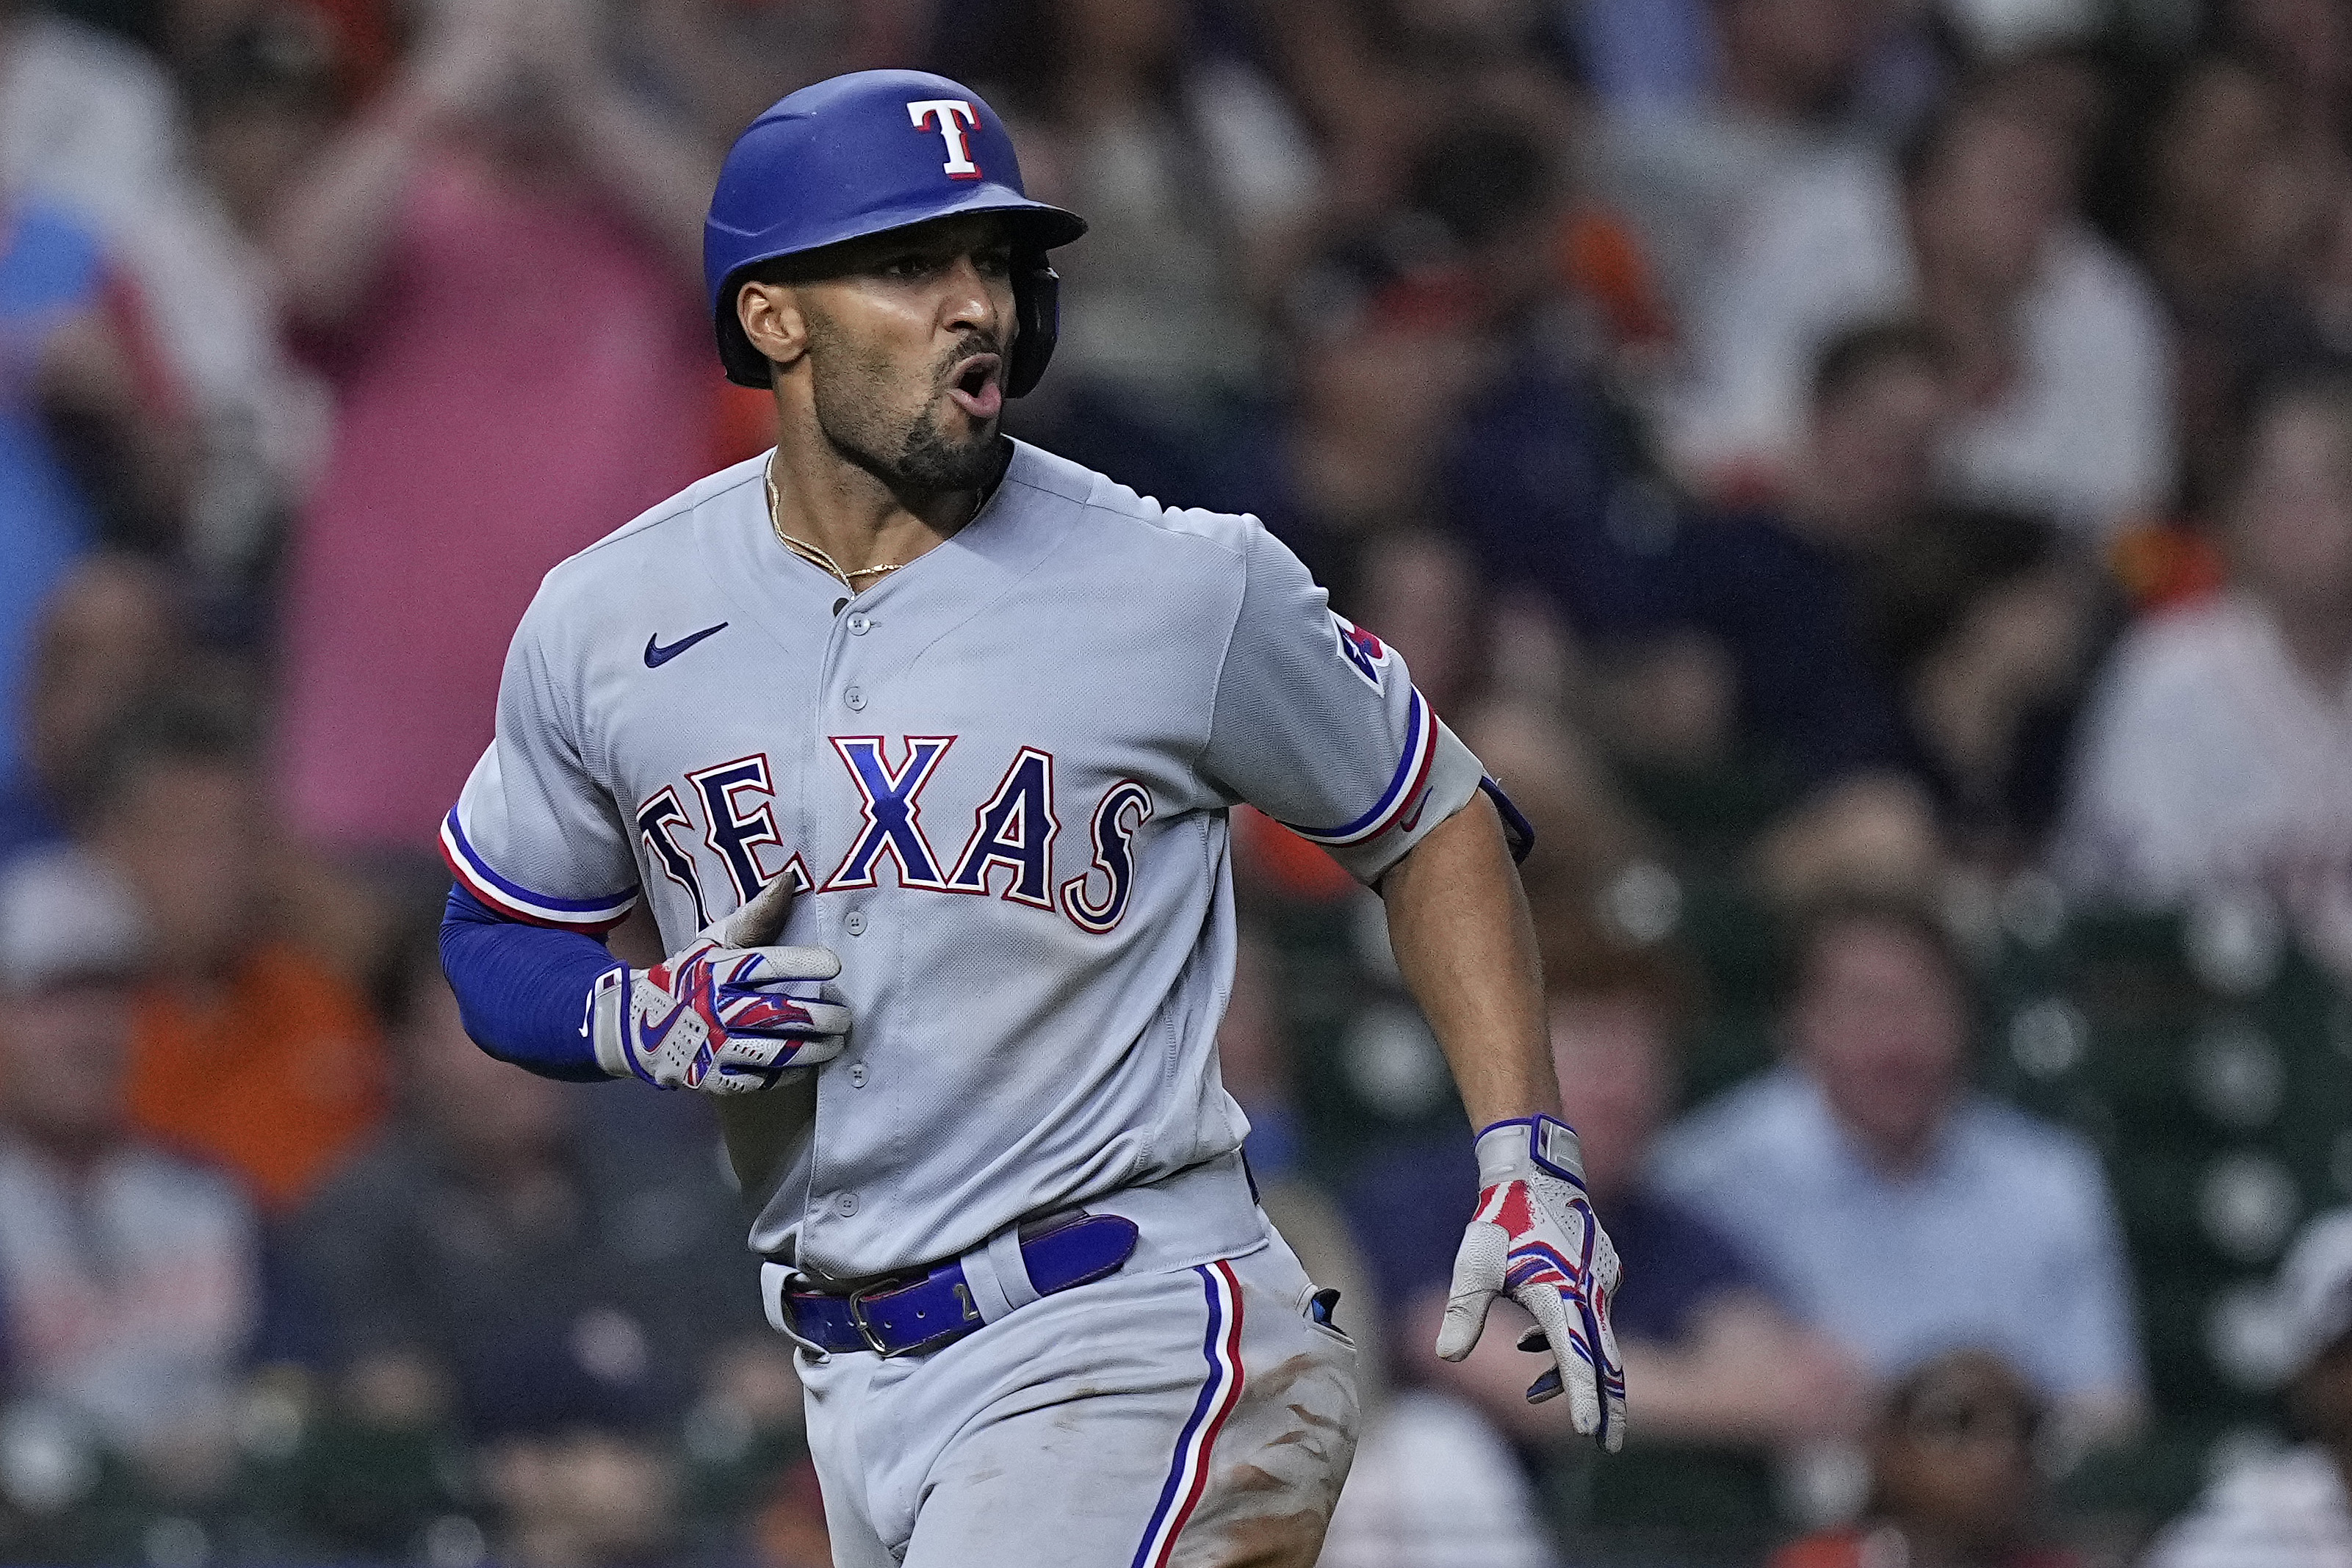 Watch: Marcus Semien ejected after benches clear in Rangers-Astros